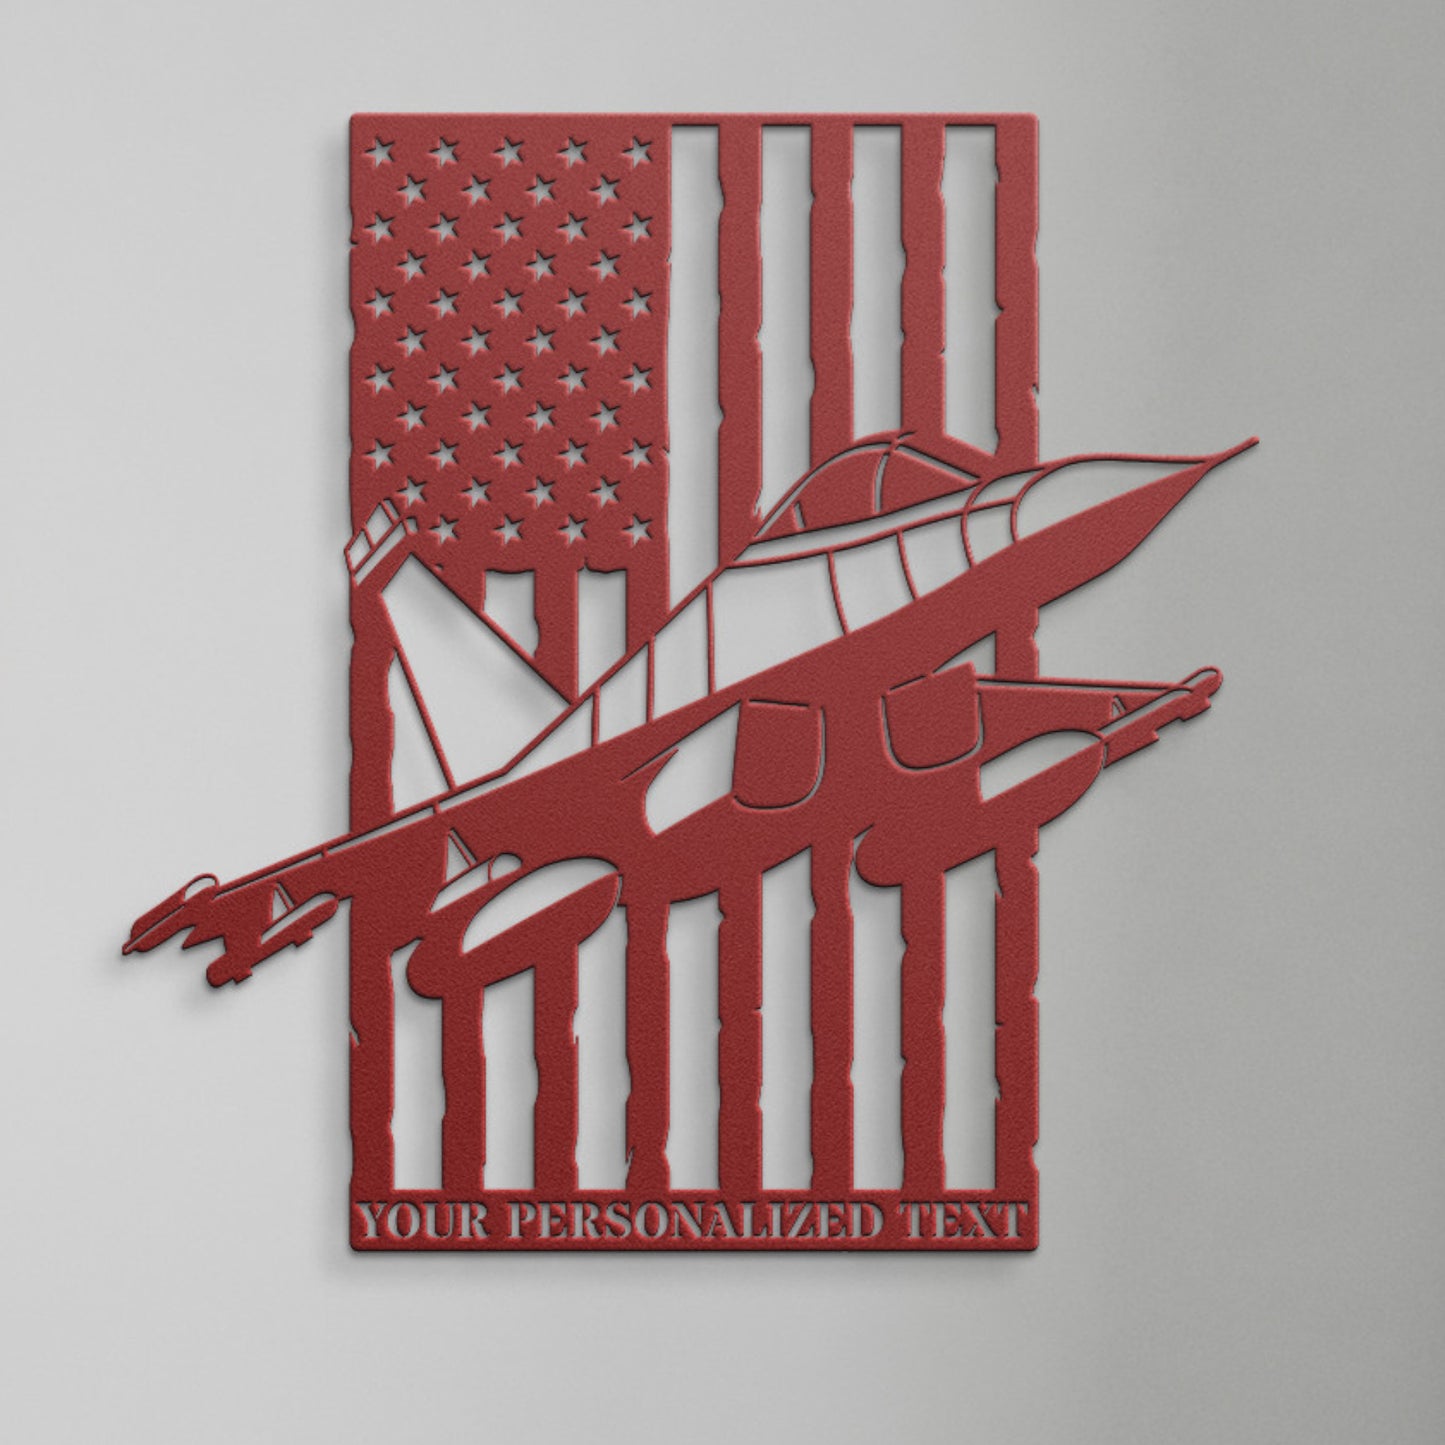 Personalized US Jet Fighter Metal Sign. Custom American Fighter Pilot Wall Decor Gift. Airplane Wall Hanging. Patriotic USA Combat Pilot 